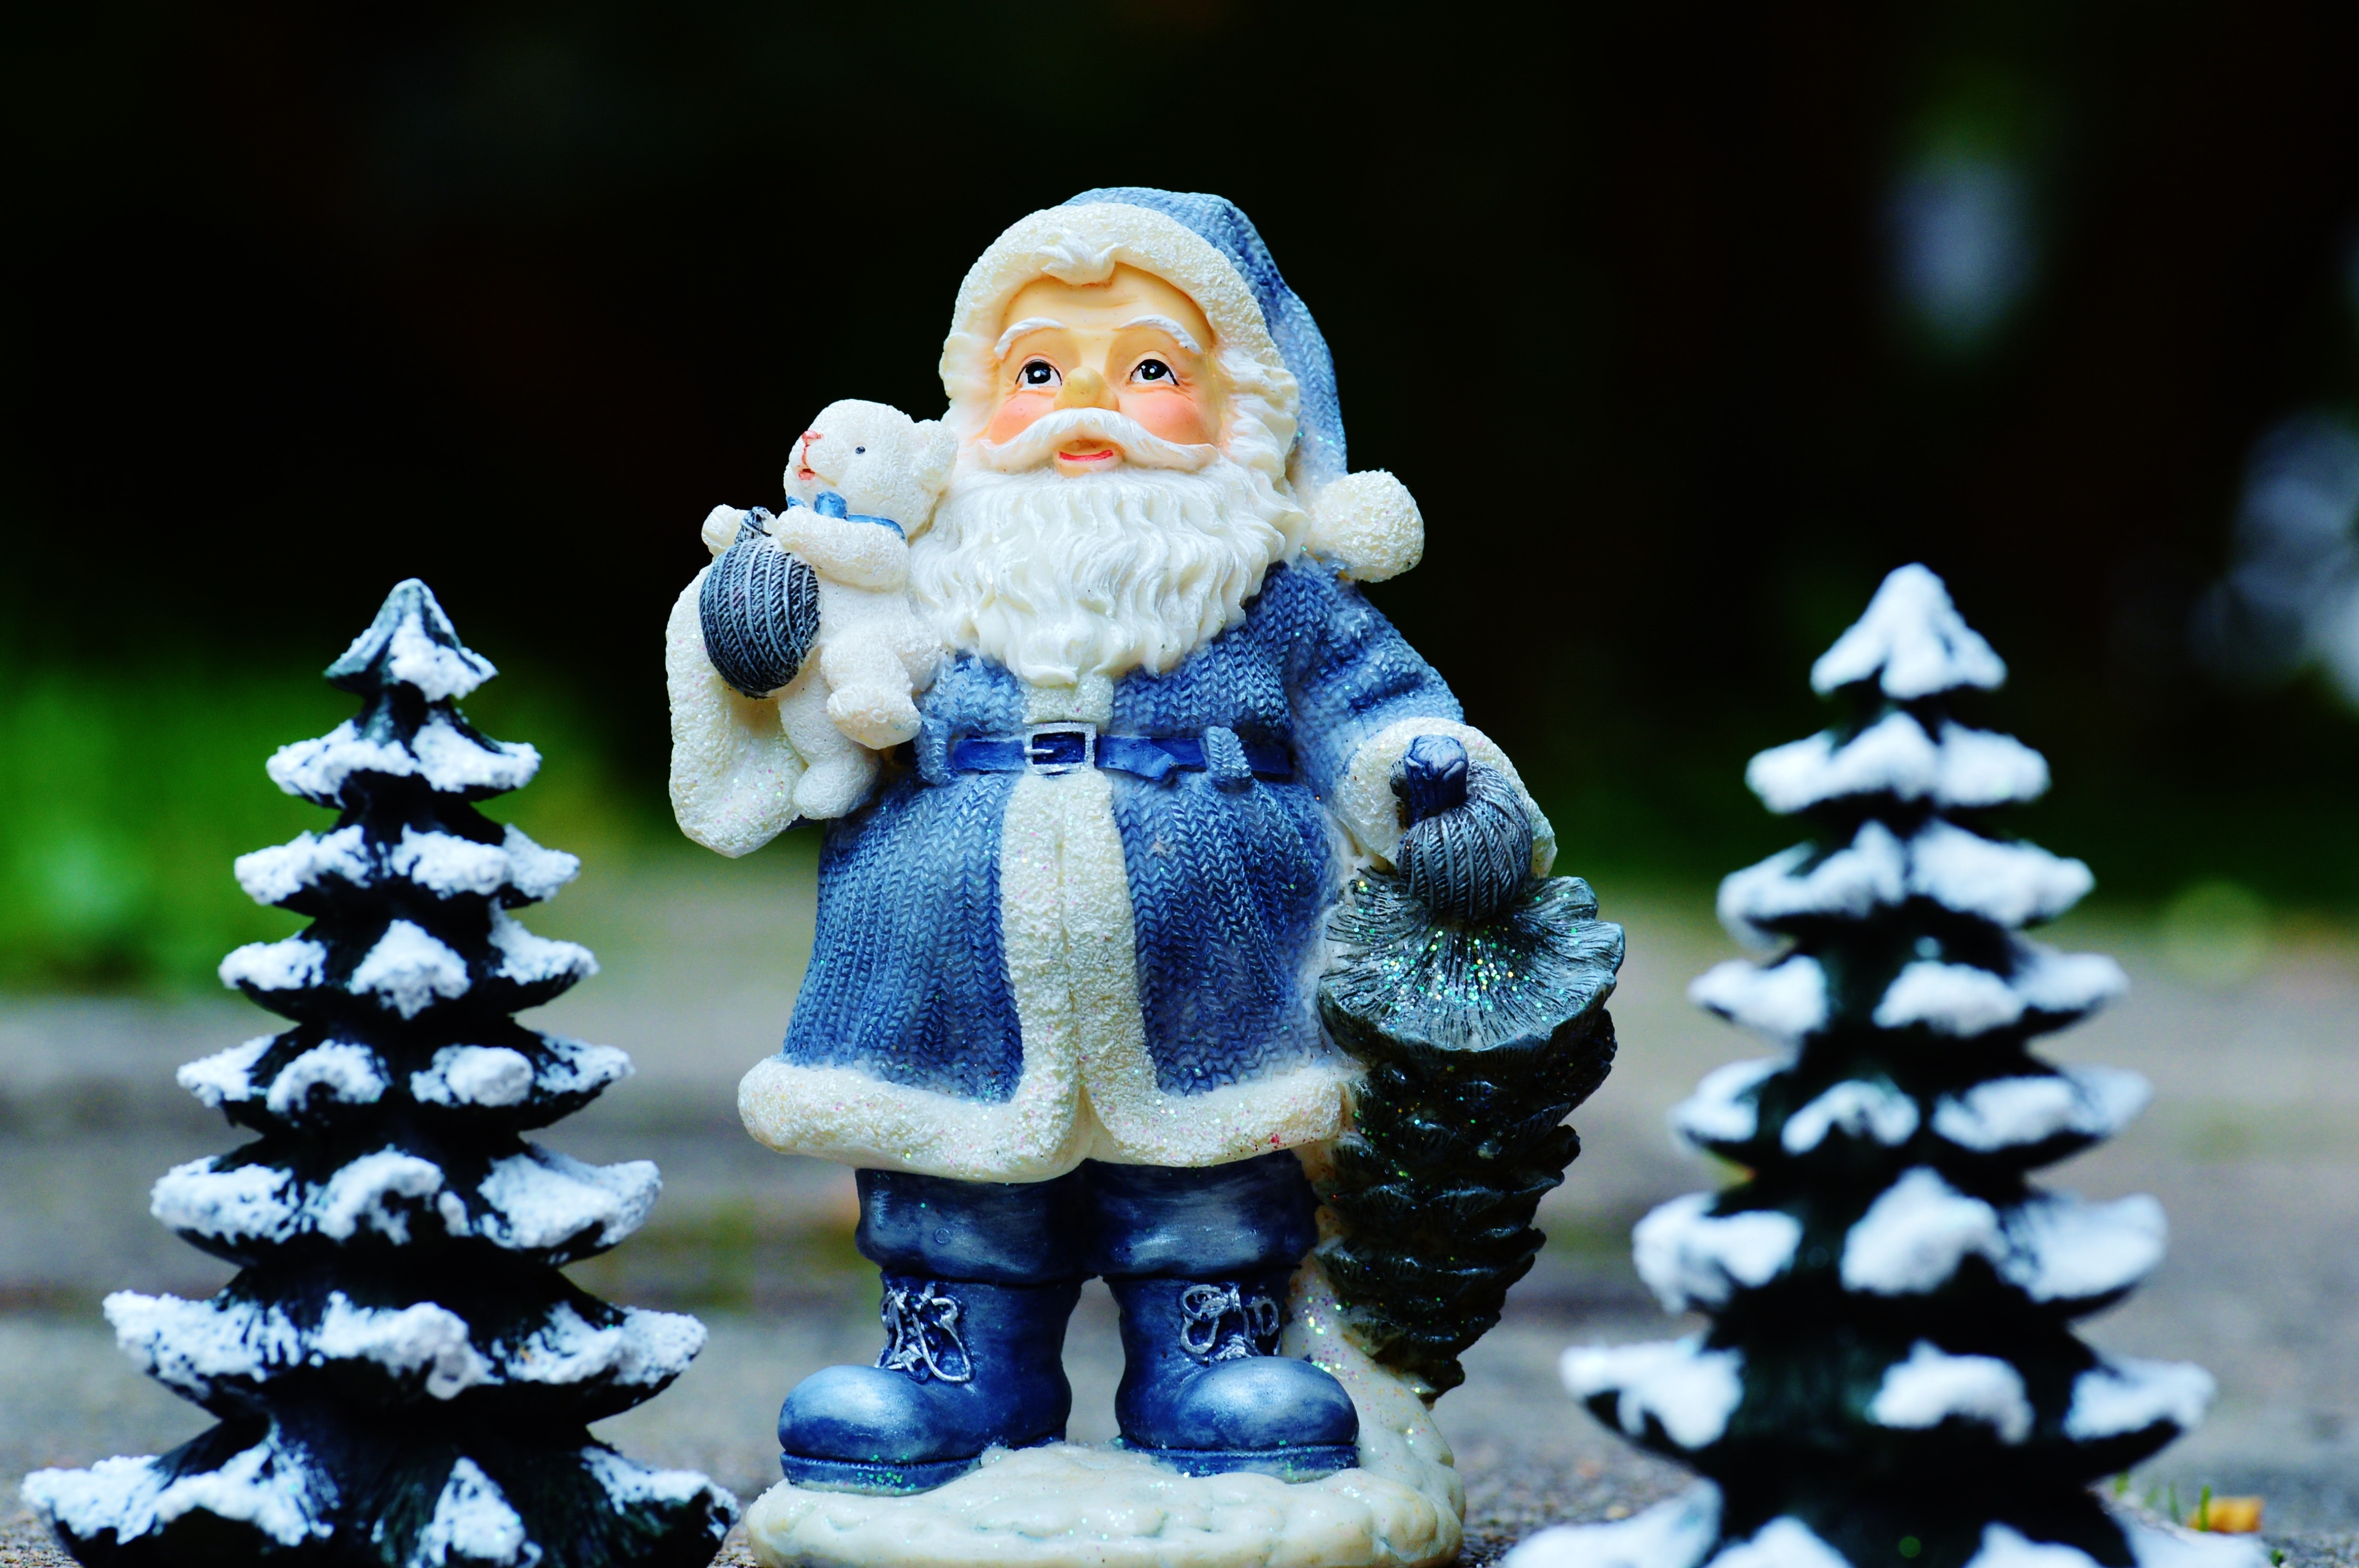 Blue And White Santa Claus Figurine Close Up Photography